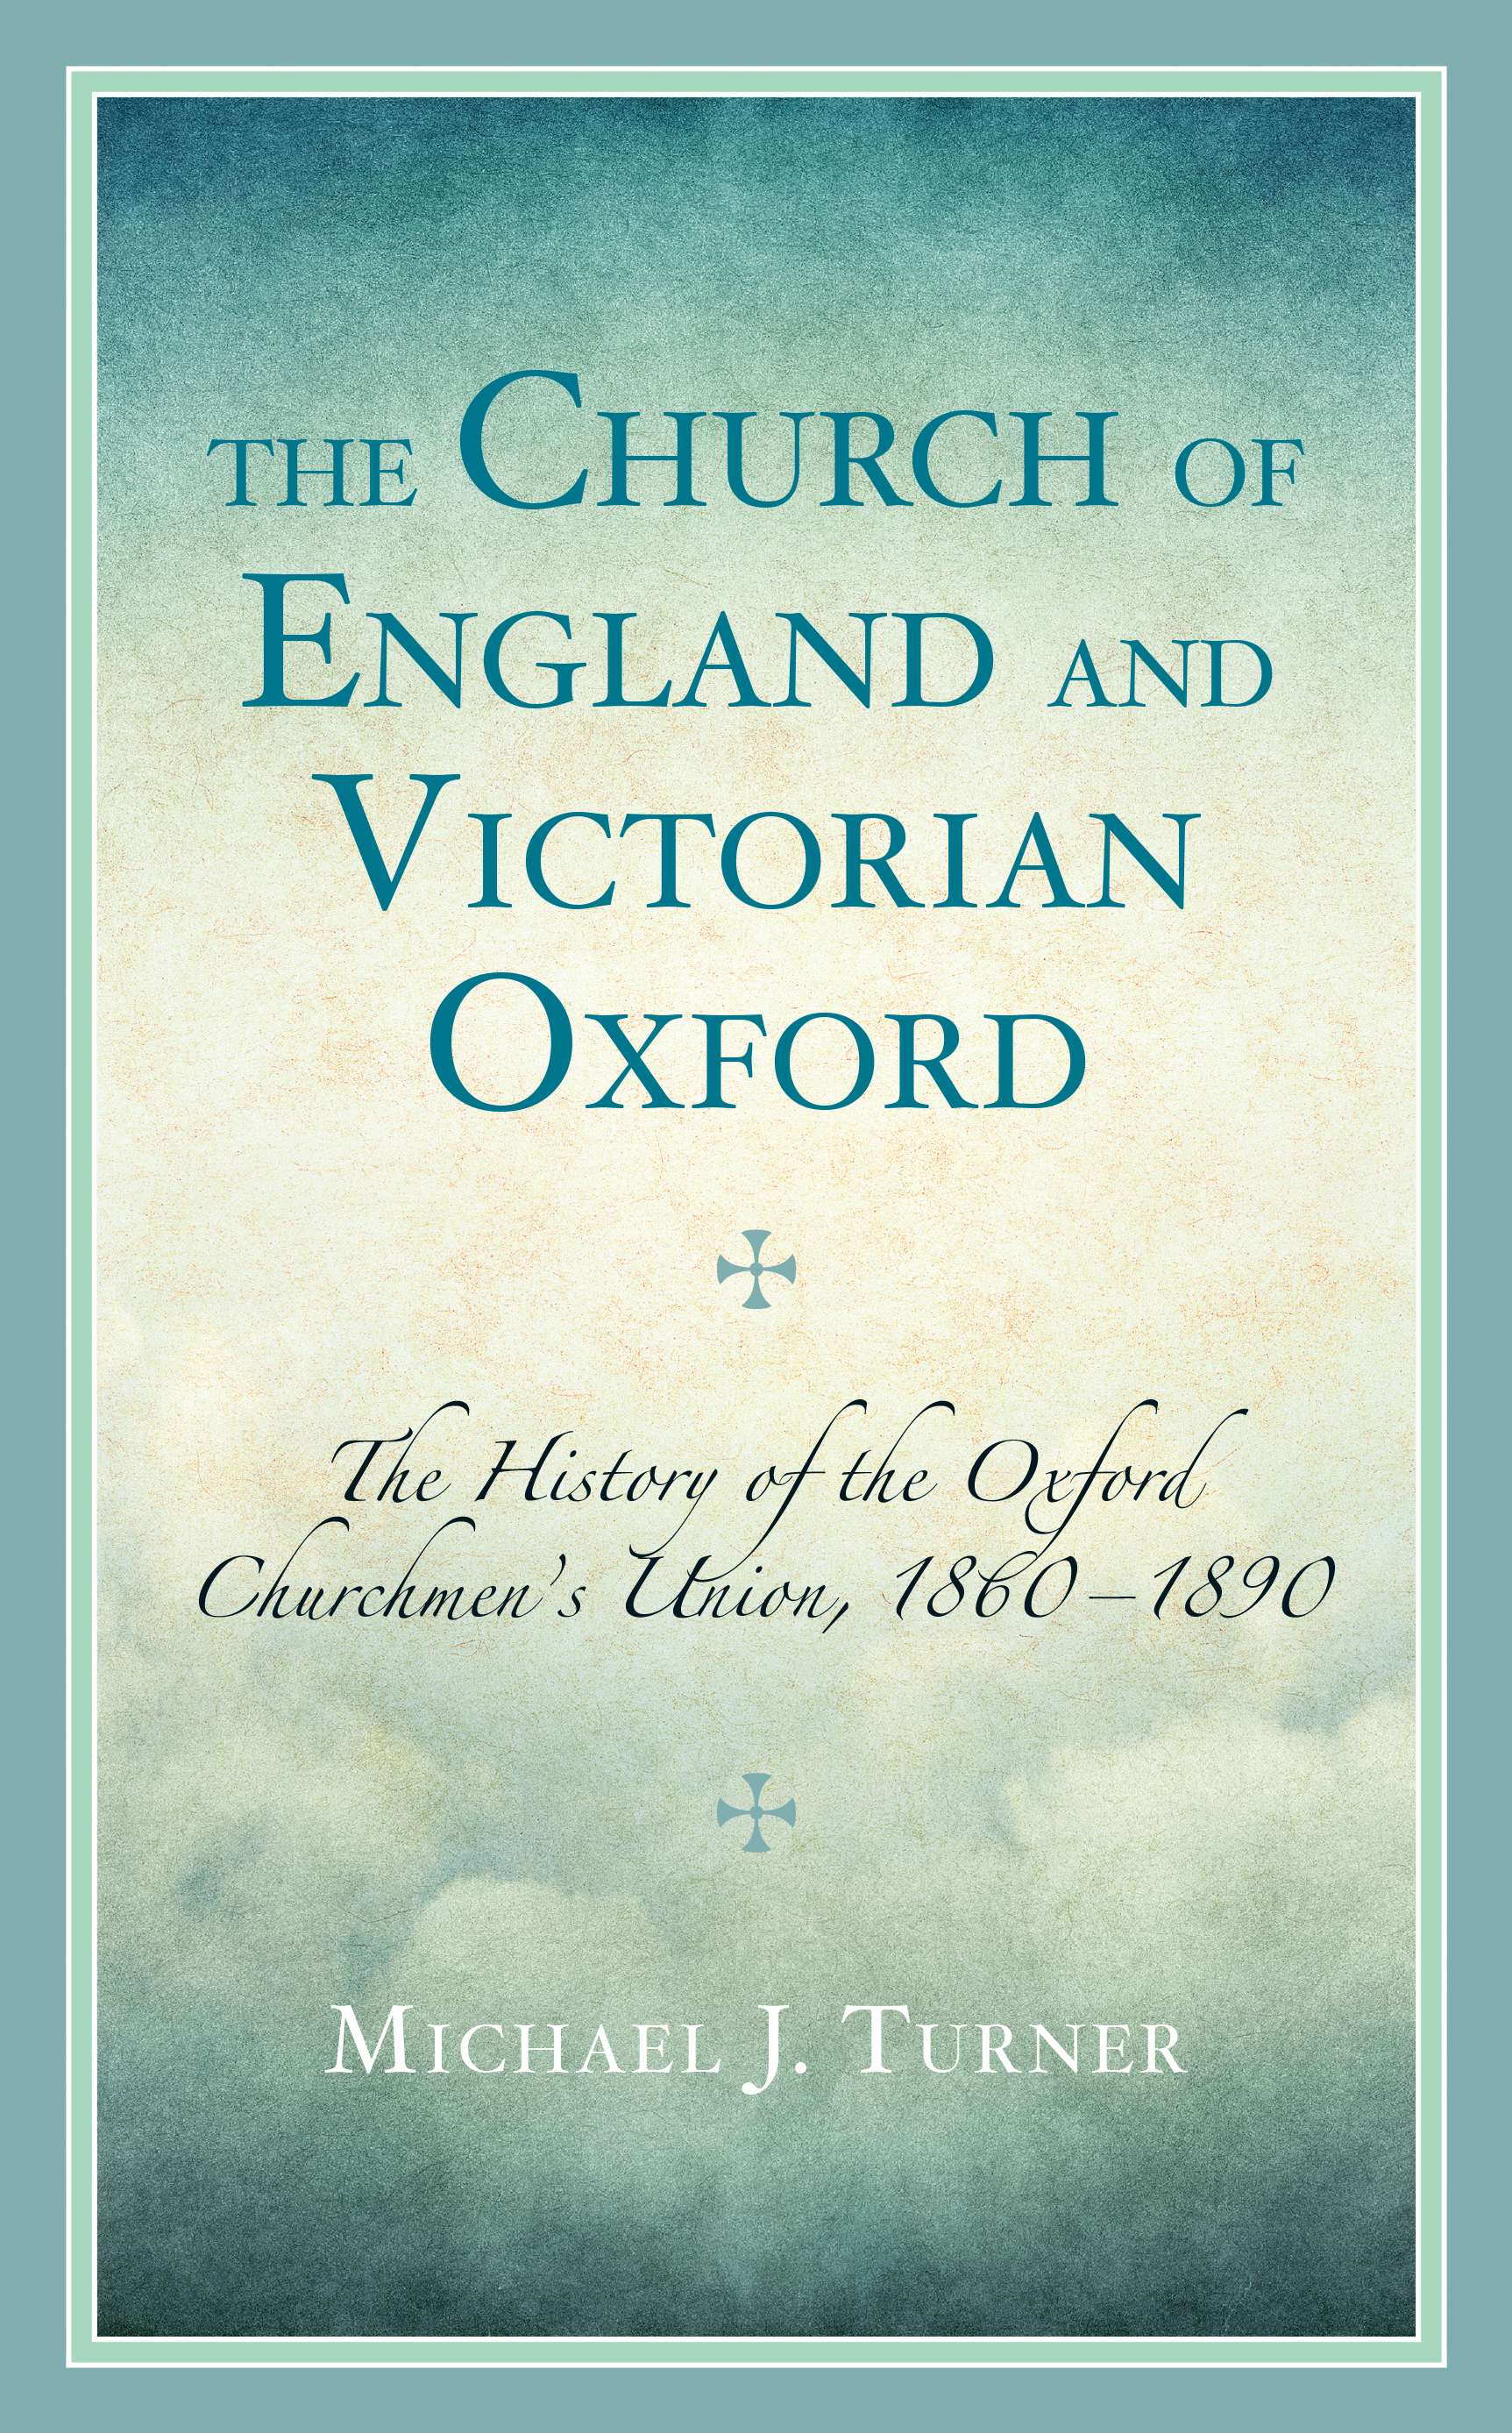 The Church of England and Victorian Oxford: The History of the Oxford Churchmen's Union, 1860–1890